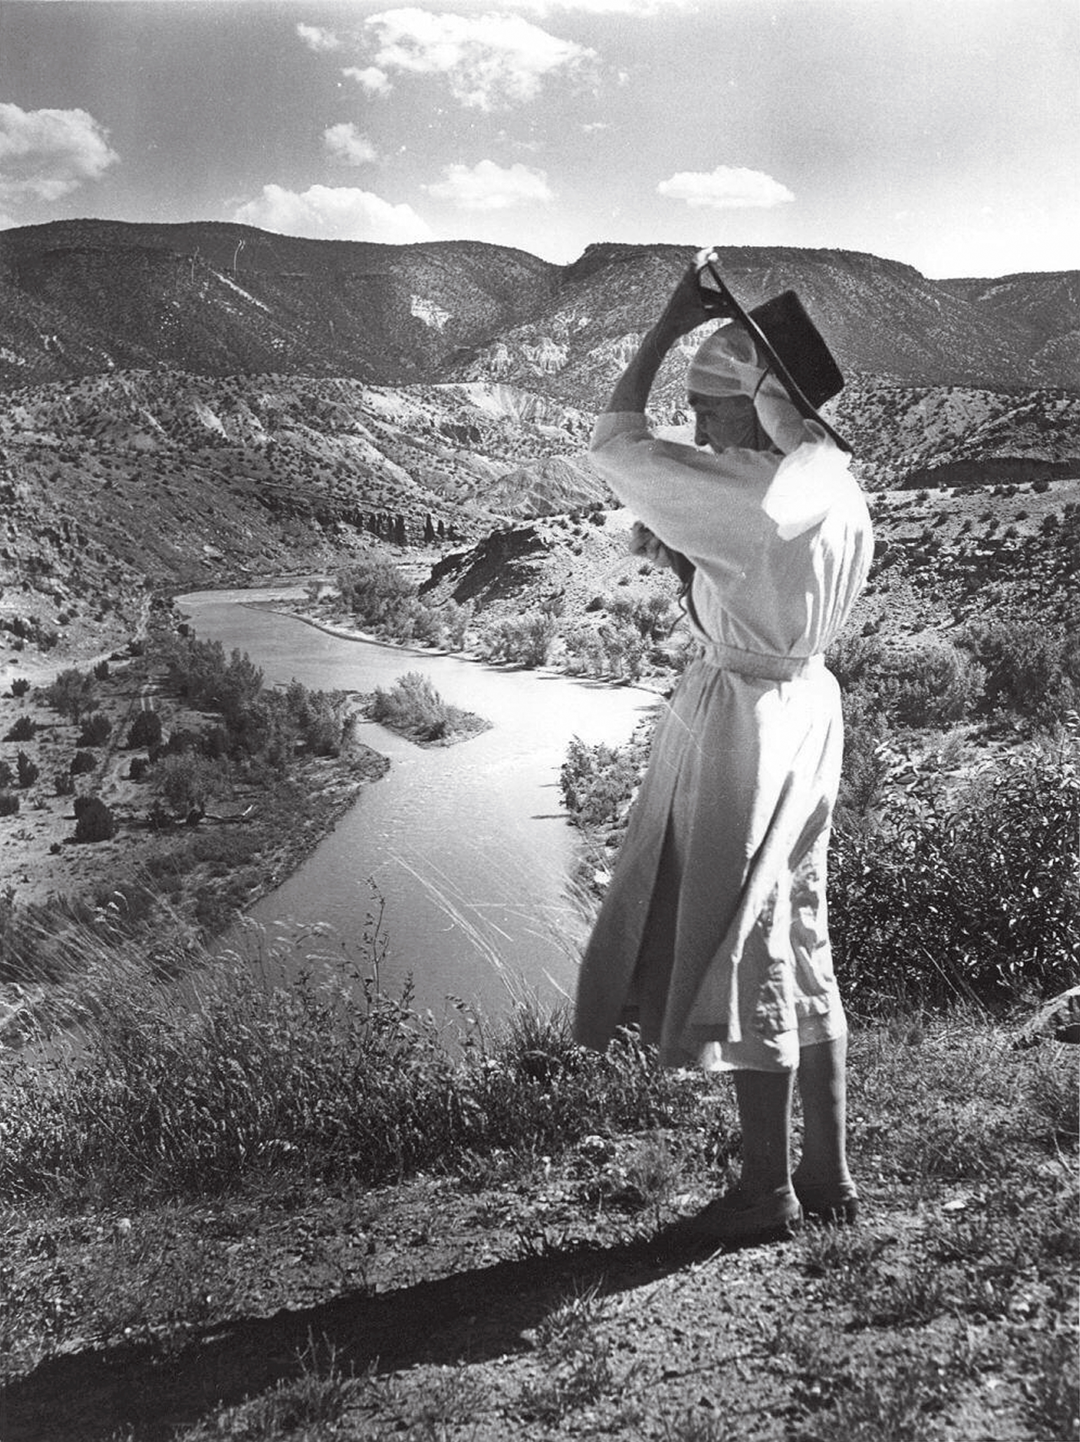 O’Keeffe in New Mexico , overlooking Chama River, 1961. © Todd Webb, Courtesy of Evans Gallery and
Estate of Todd & Lucille Webb, Portland, Maine USA. As reproduced in our Georgia O'Keeffe book